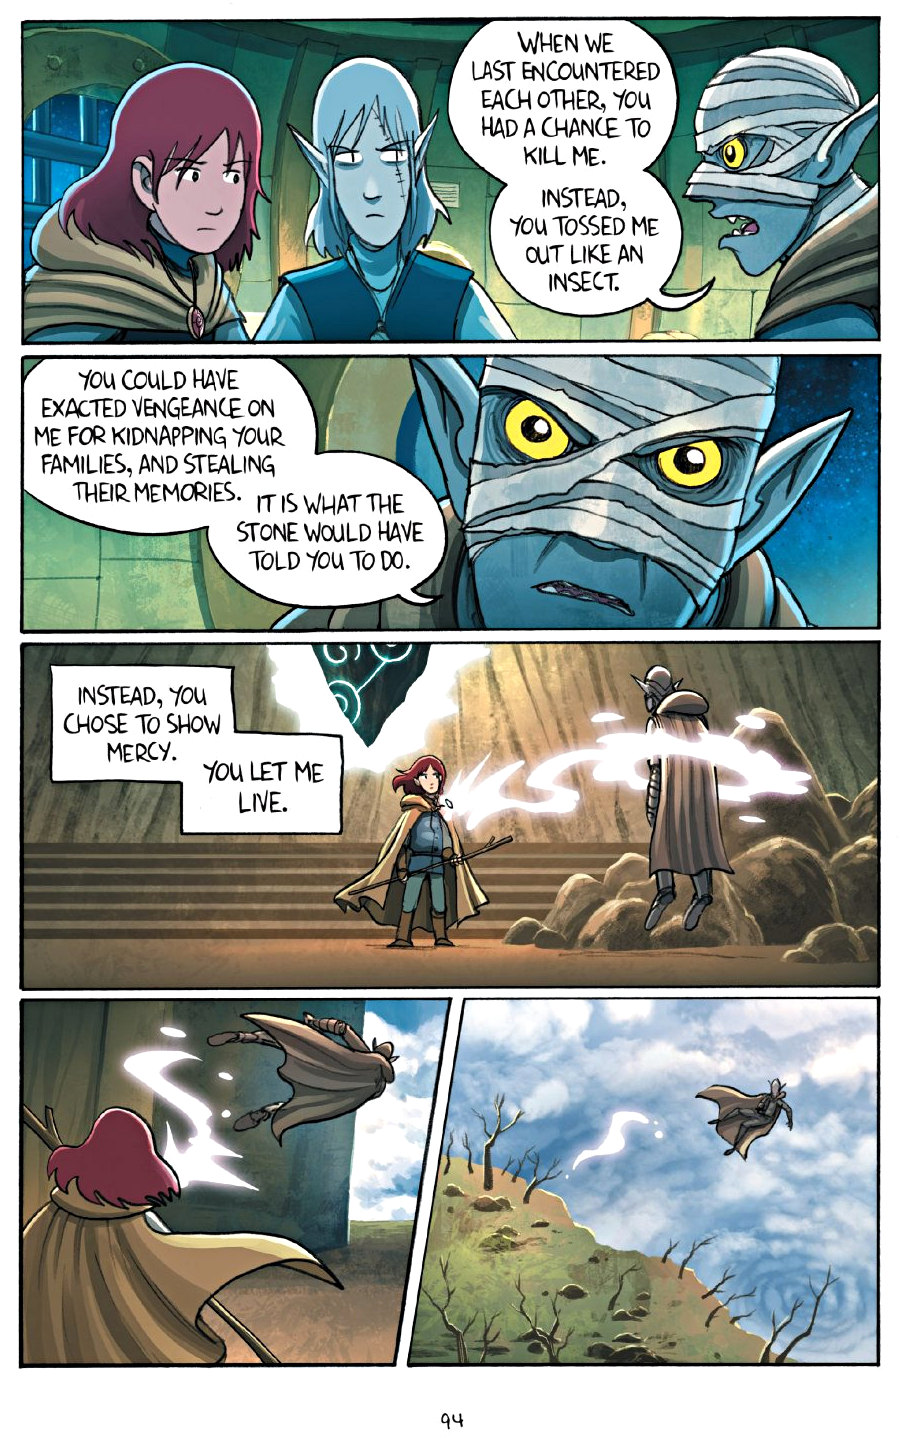 page 94 of amulet 7 firelight graphic novel